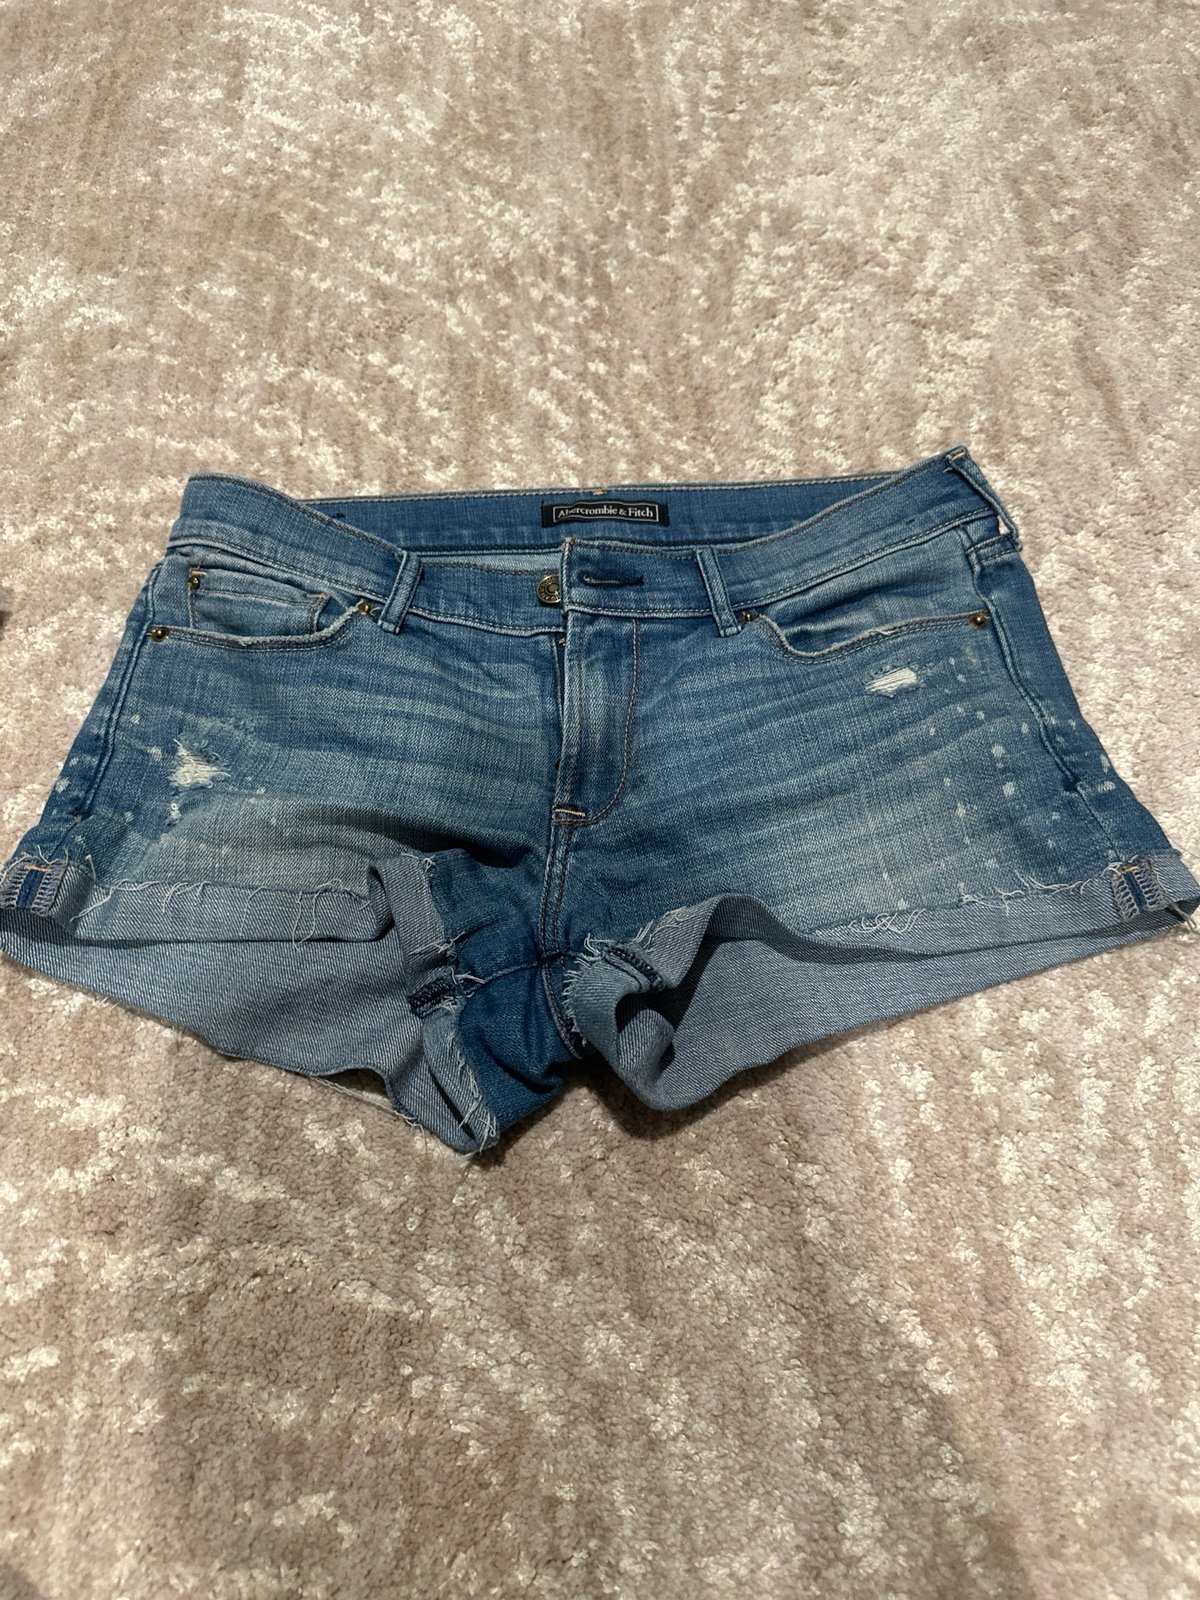 large discount Abercrombie and Fitch shorts KIidc8ONf O